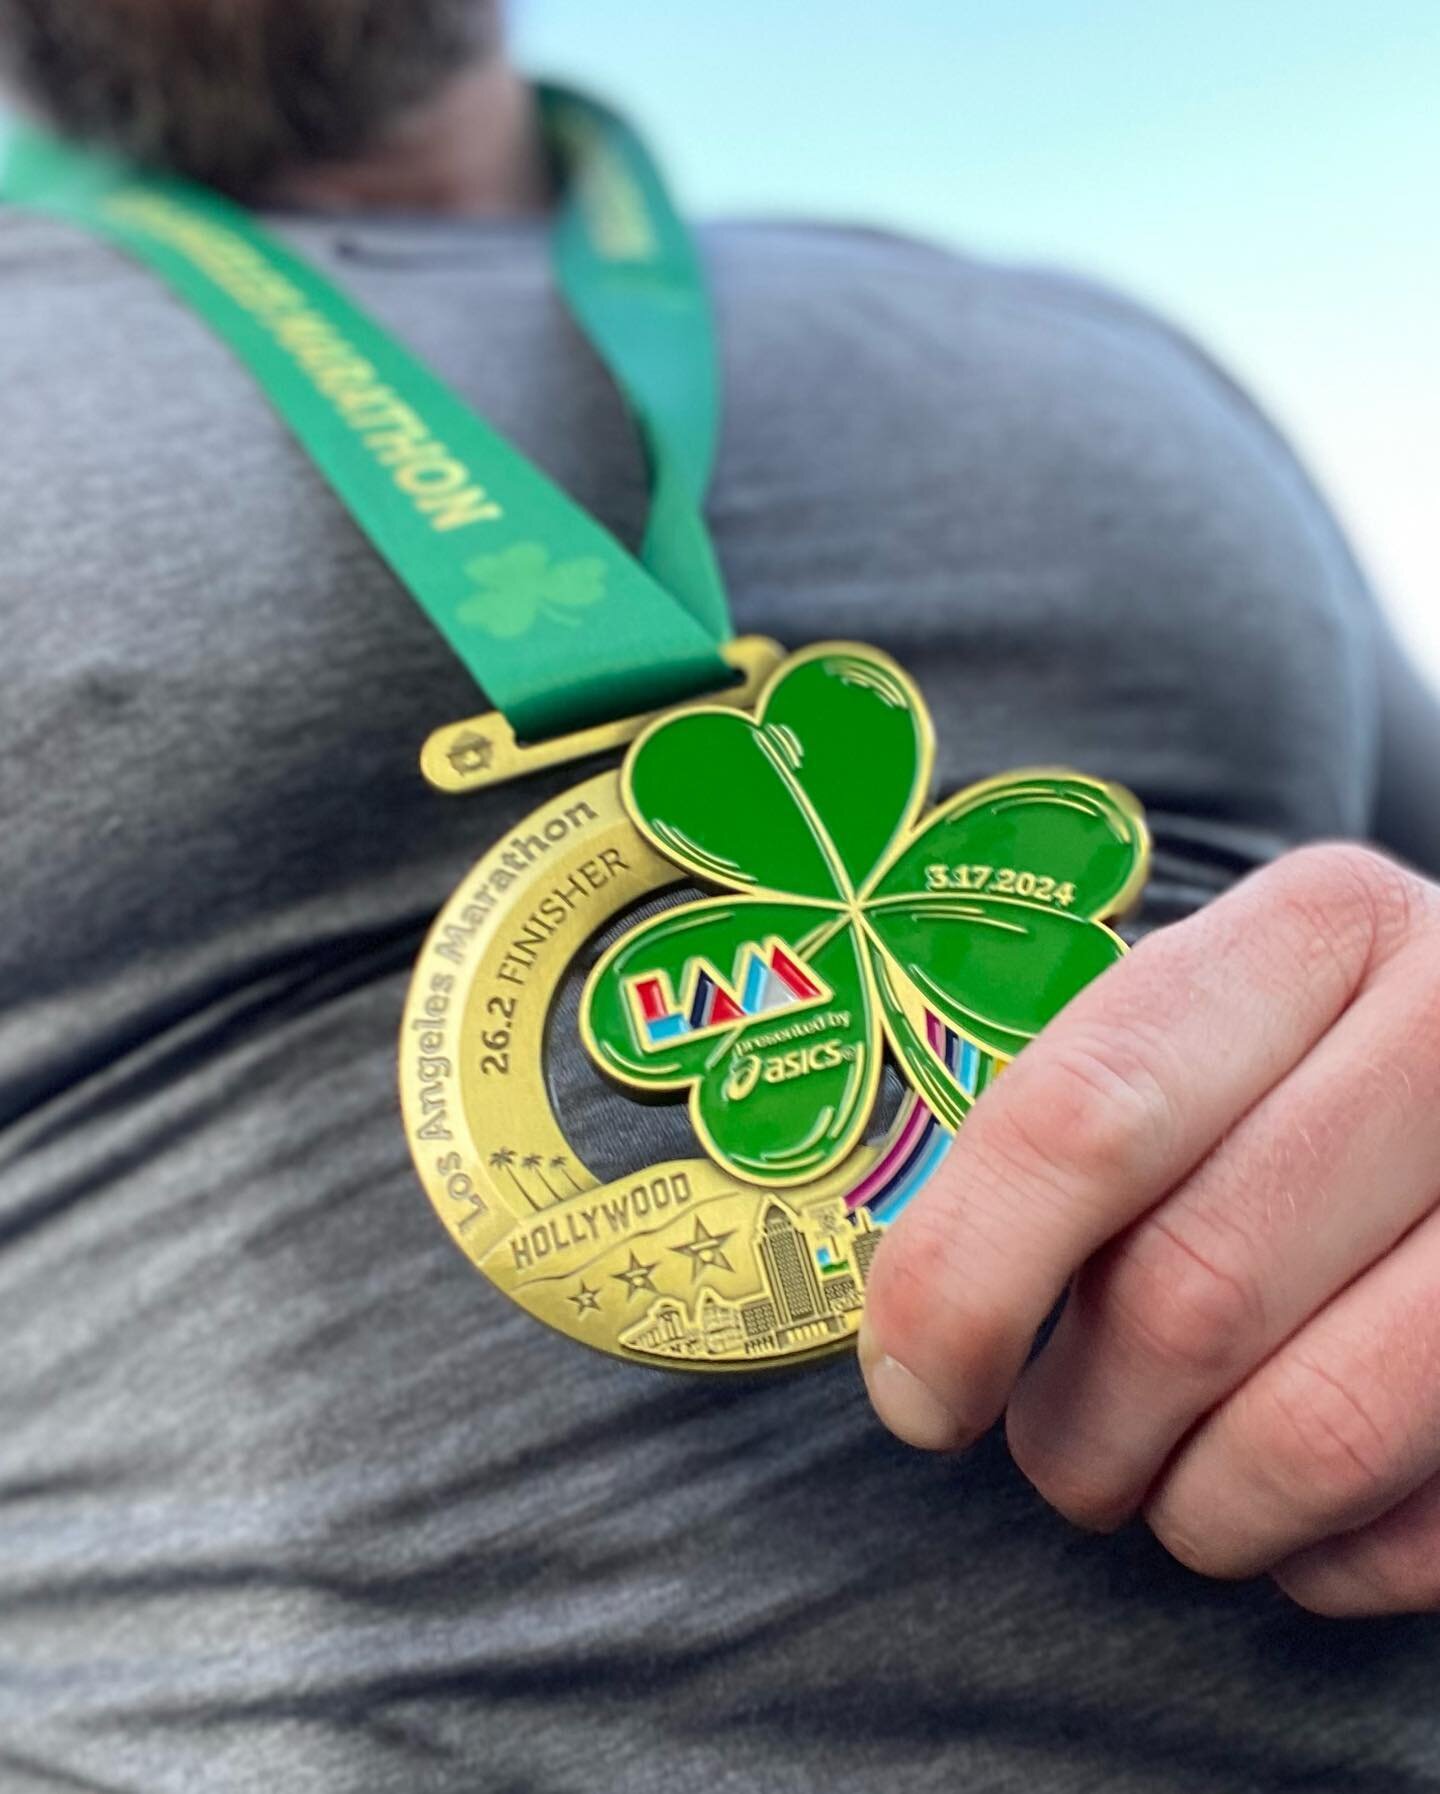 Second from the &lsquo;top of the mornin&rsquo; in LA. Beautiful finishers medals commemorating St. Patty&rsquo;s Day ☘️ this year.

I had a strong start breaking away away from Dodgers Stadium, and zig zagging through hilly downtown LA. This is a ve